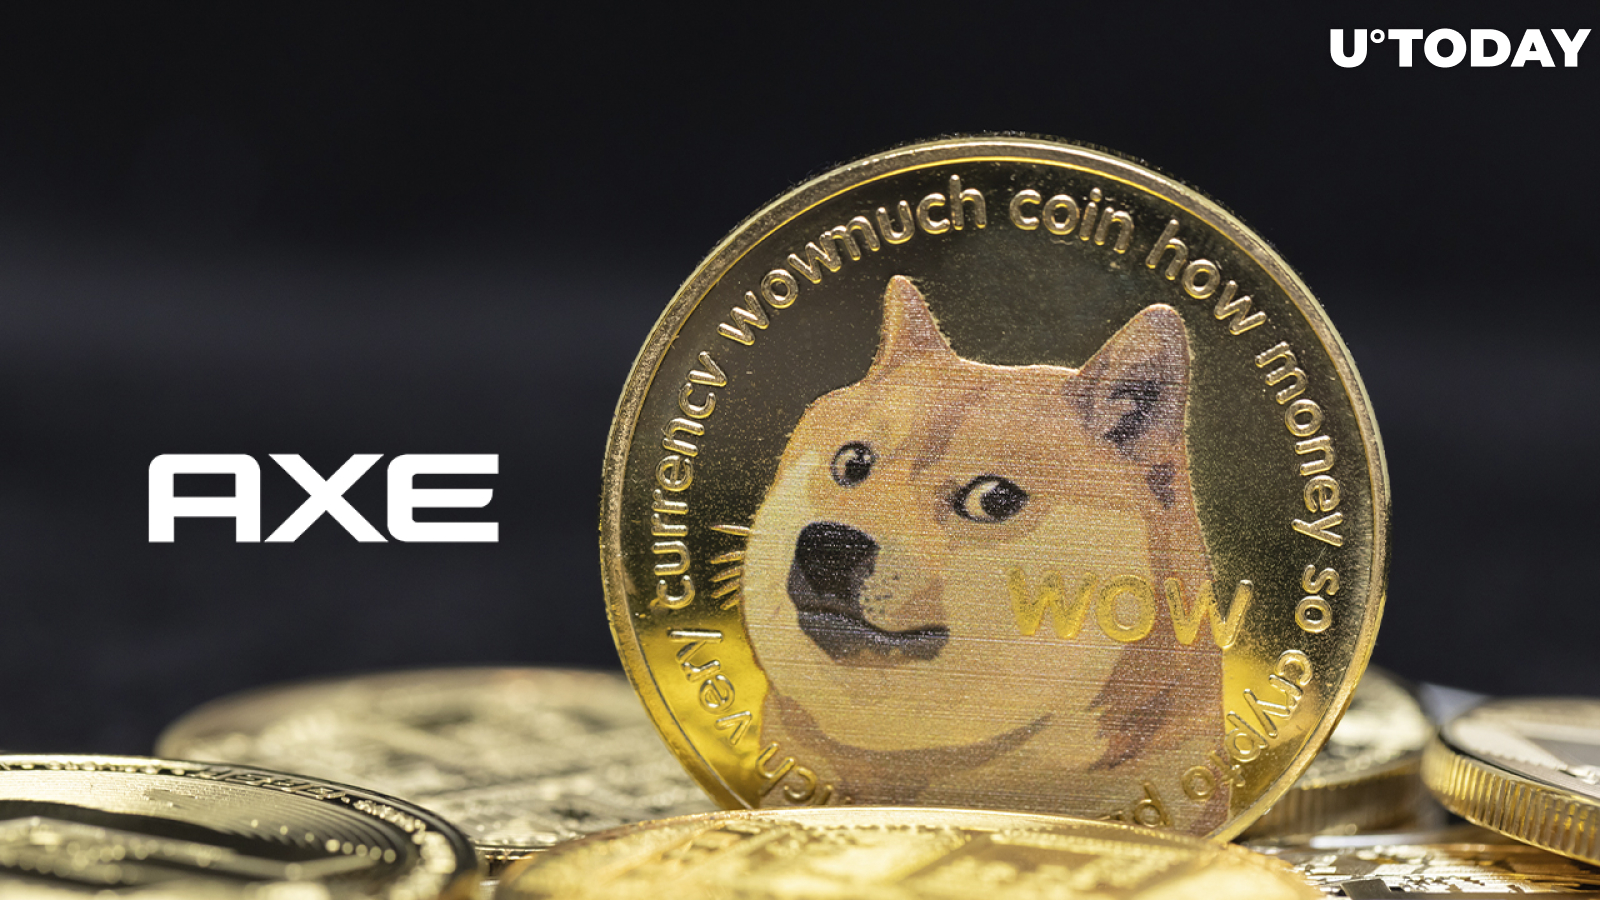 AXE to Drop Dogecoin-Themed Deodorant Stick Today